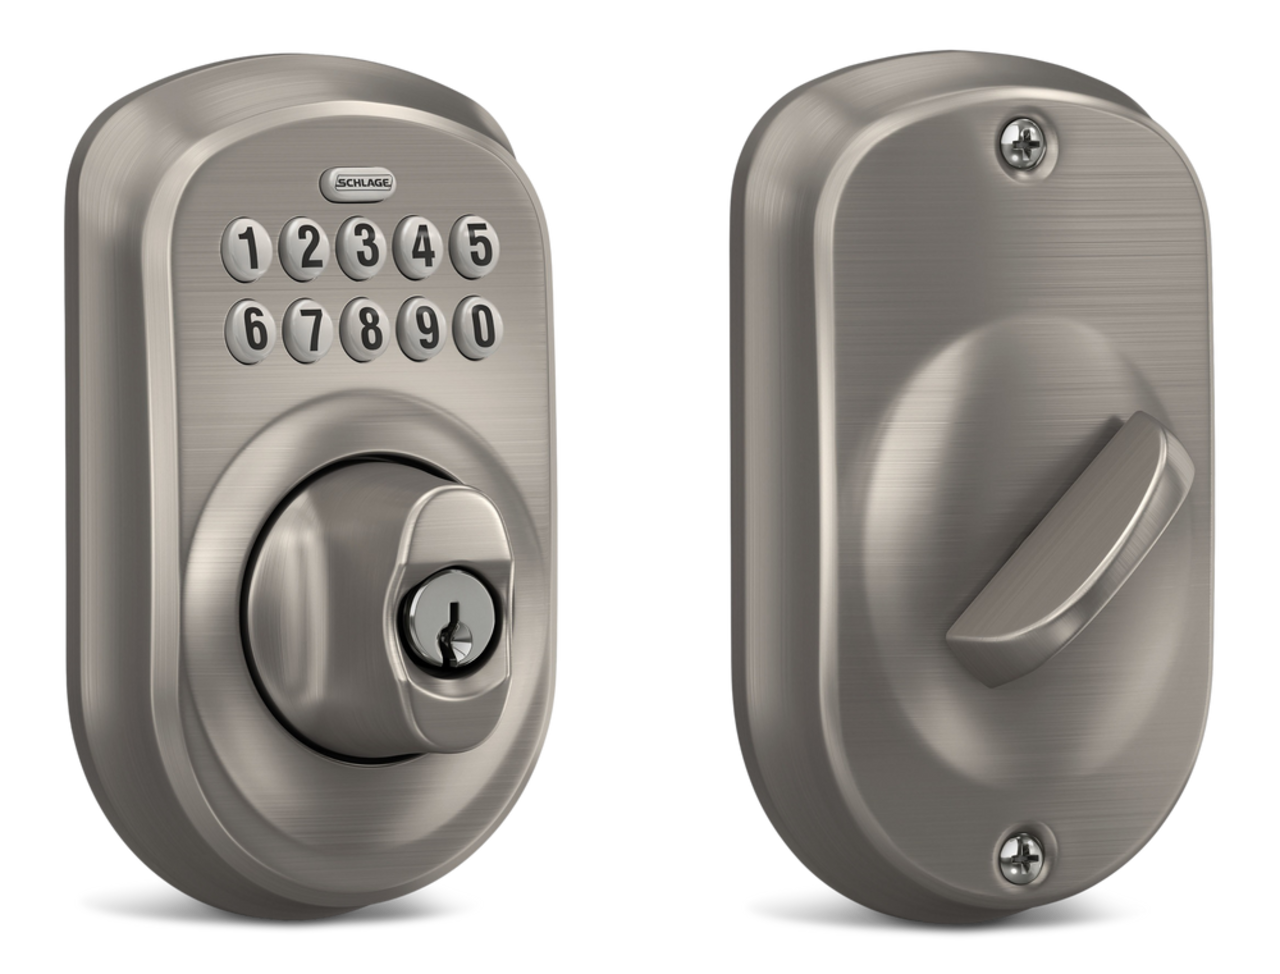 https://media-www.canadiantire.ca/product/fixing/hardware/curb-appeal/0463436/schlage-plymouth-keypad-deadbolt-satin-nickel-043d760d-bb3a-4e2d-96eb-6d6b6dcf7efd.png?imdensity=1&imwidth=640&impolicy=mZoom